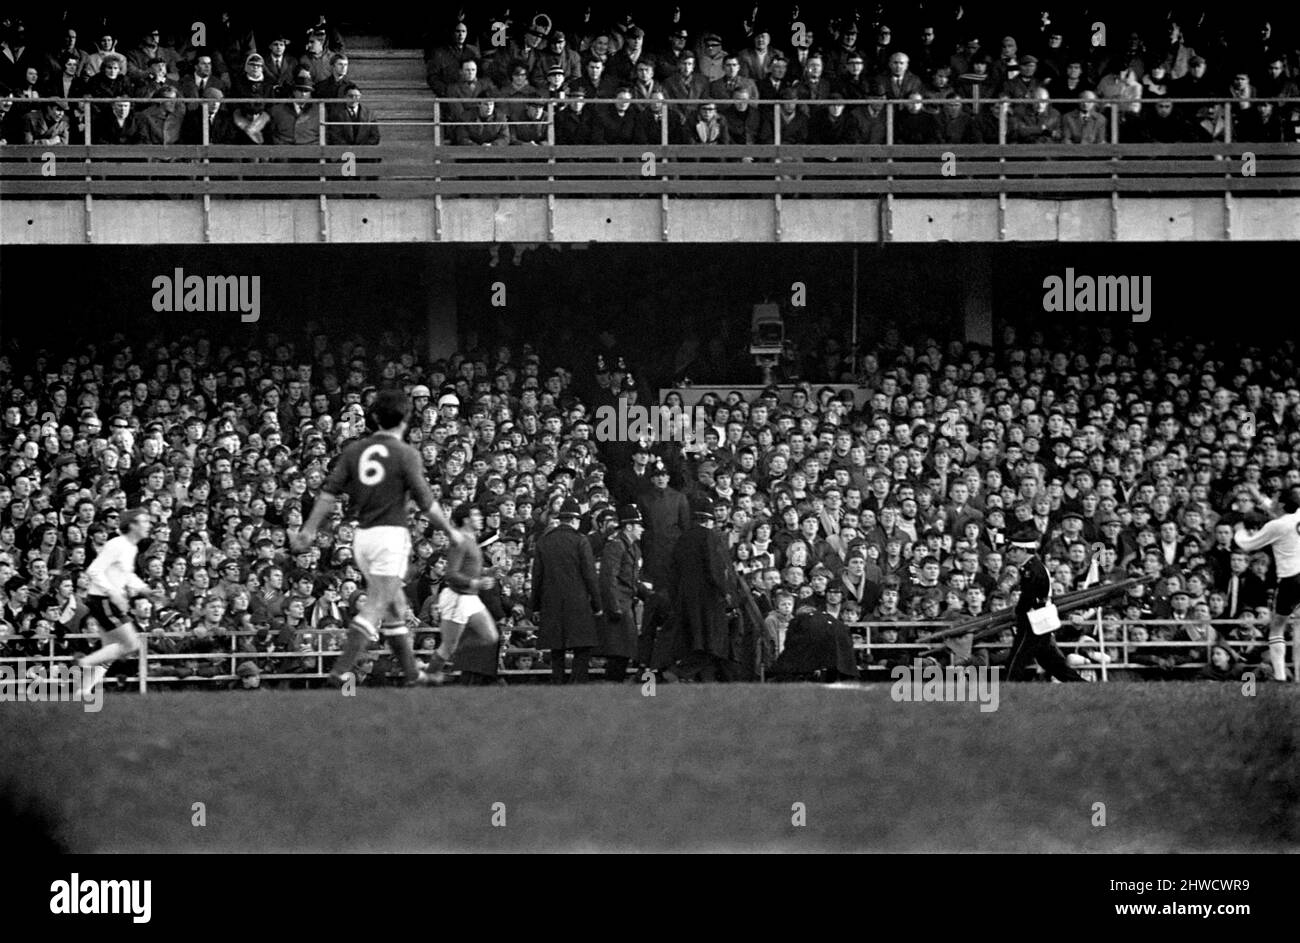 Derby v. Nottingham Forest. Police and St. John mt. men at the trouble spot in the crowed. December 1969 Z11534-012 Stock Photo